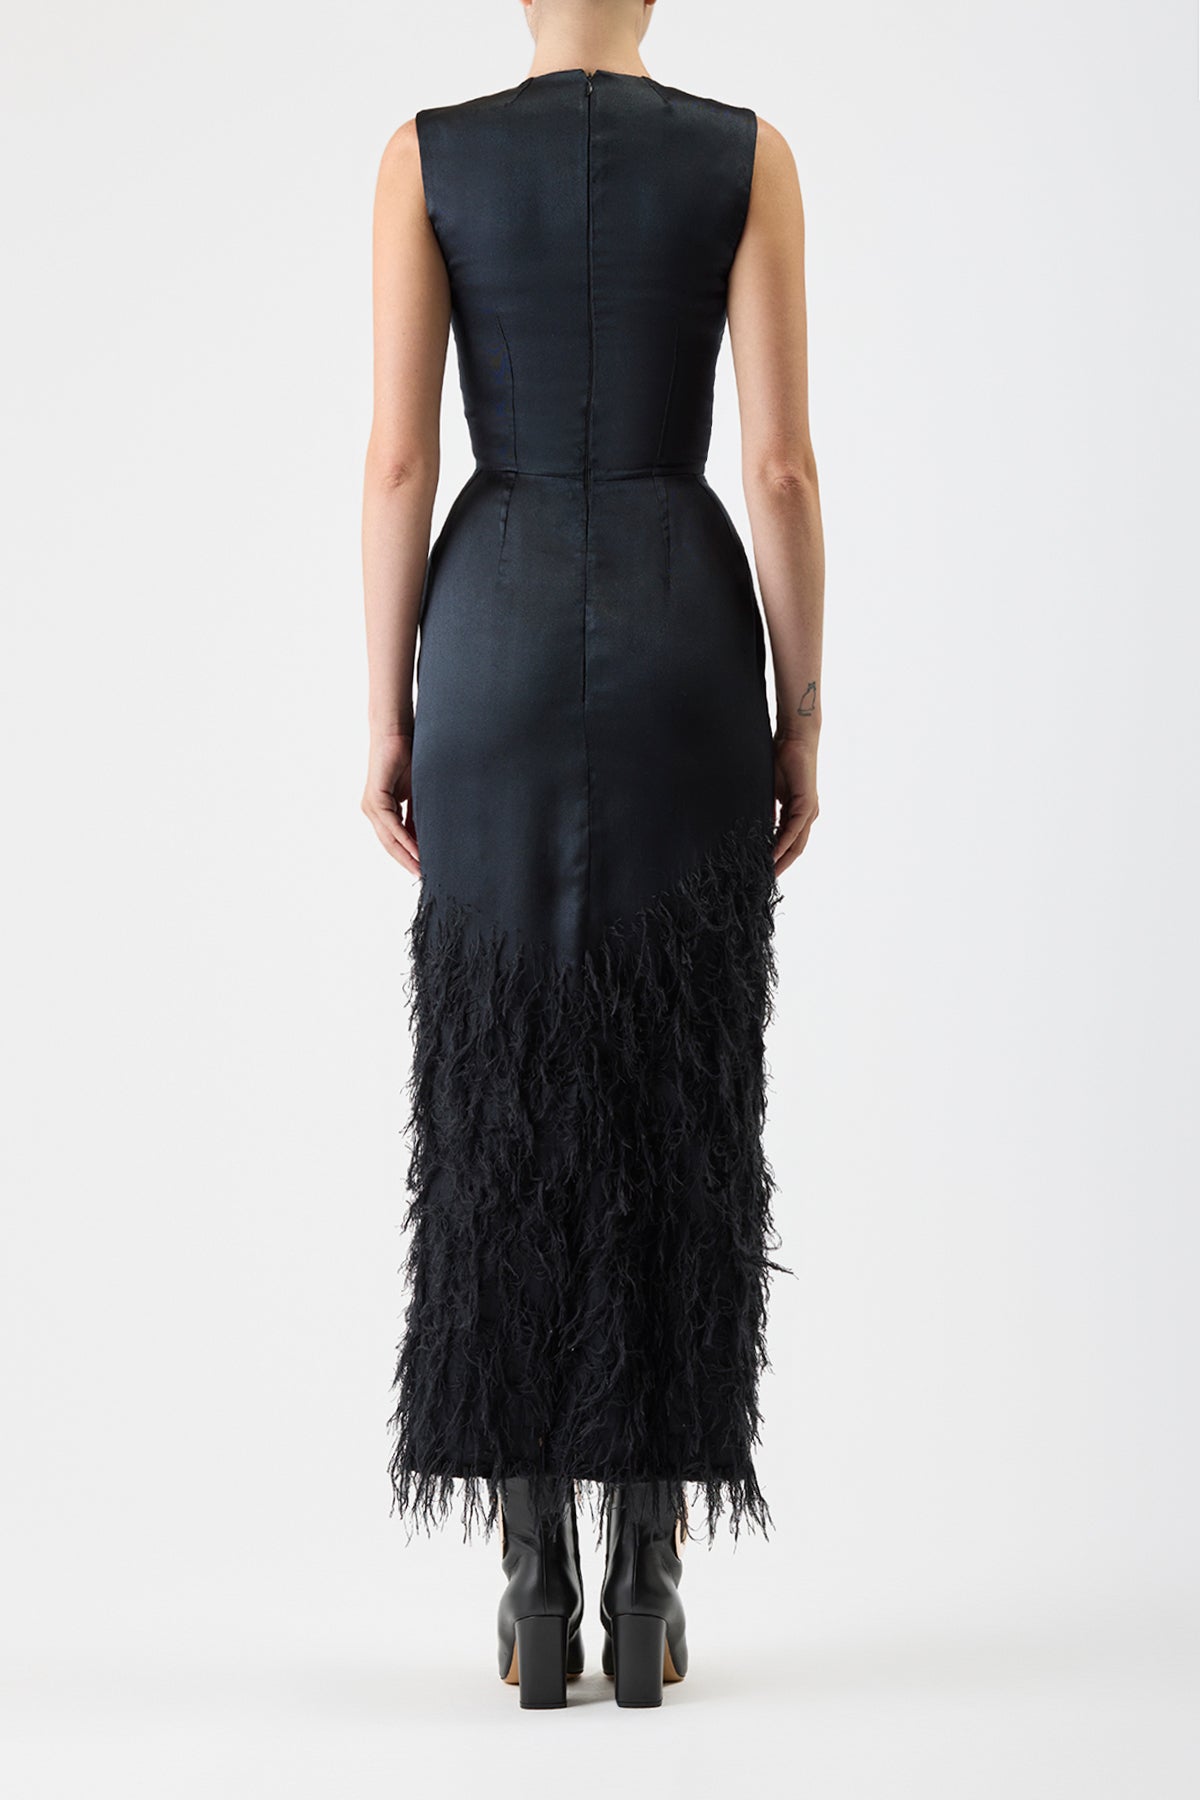 Maslow Feather Dress in Black Silk